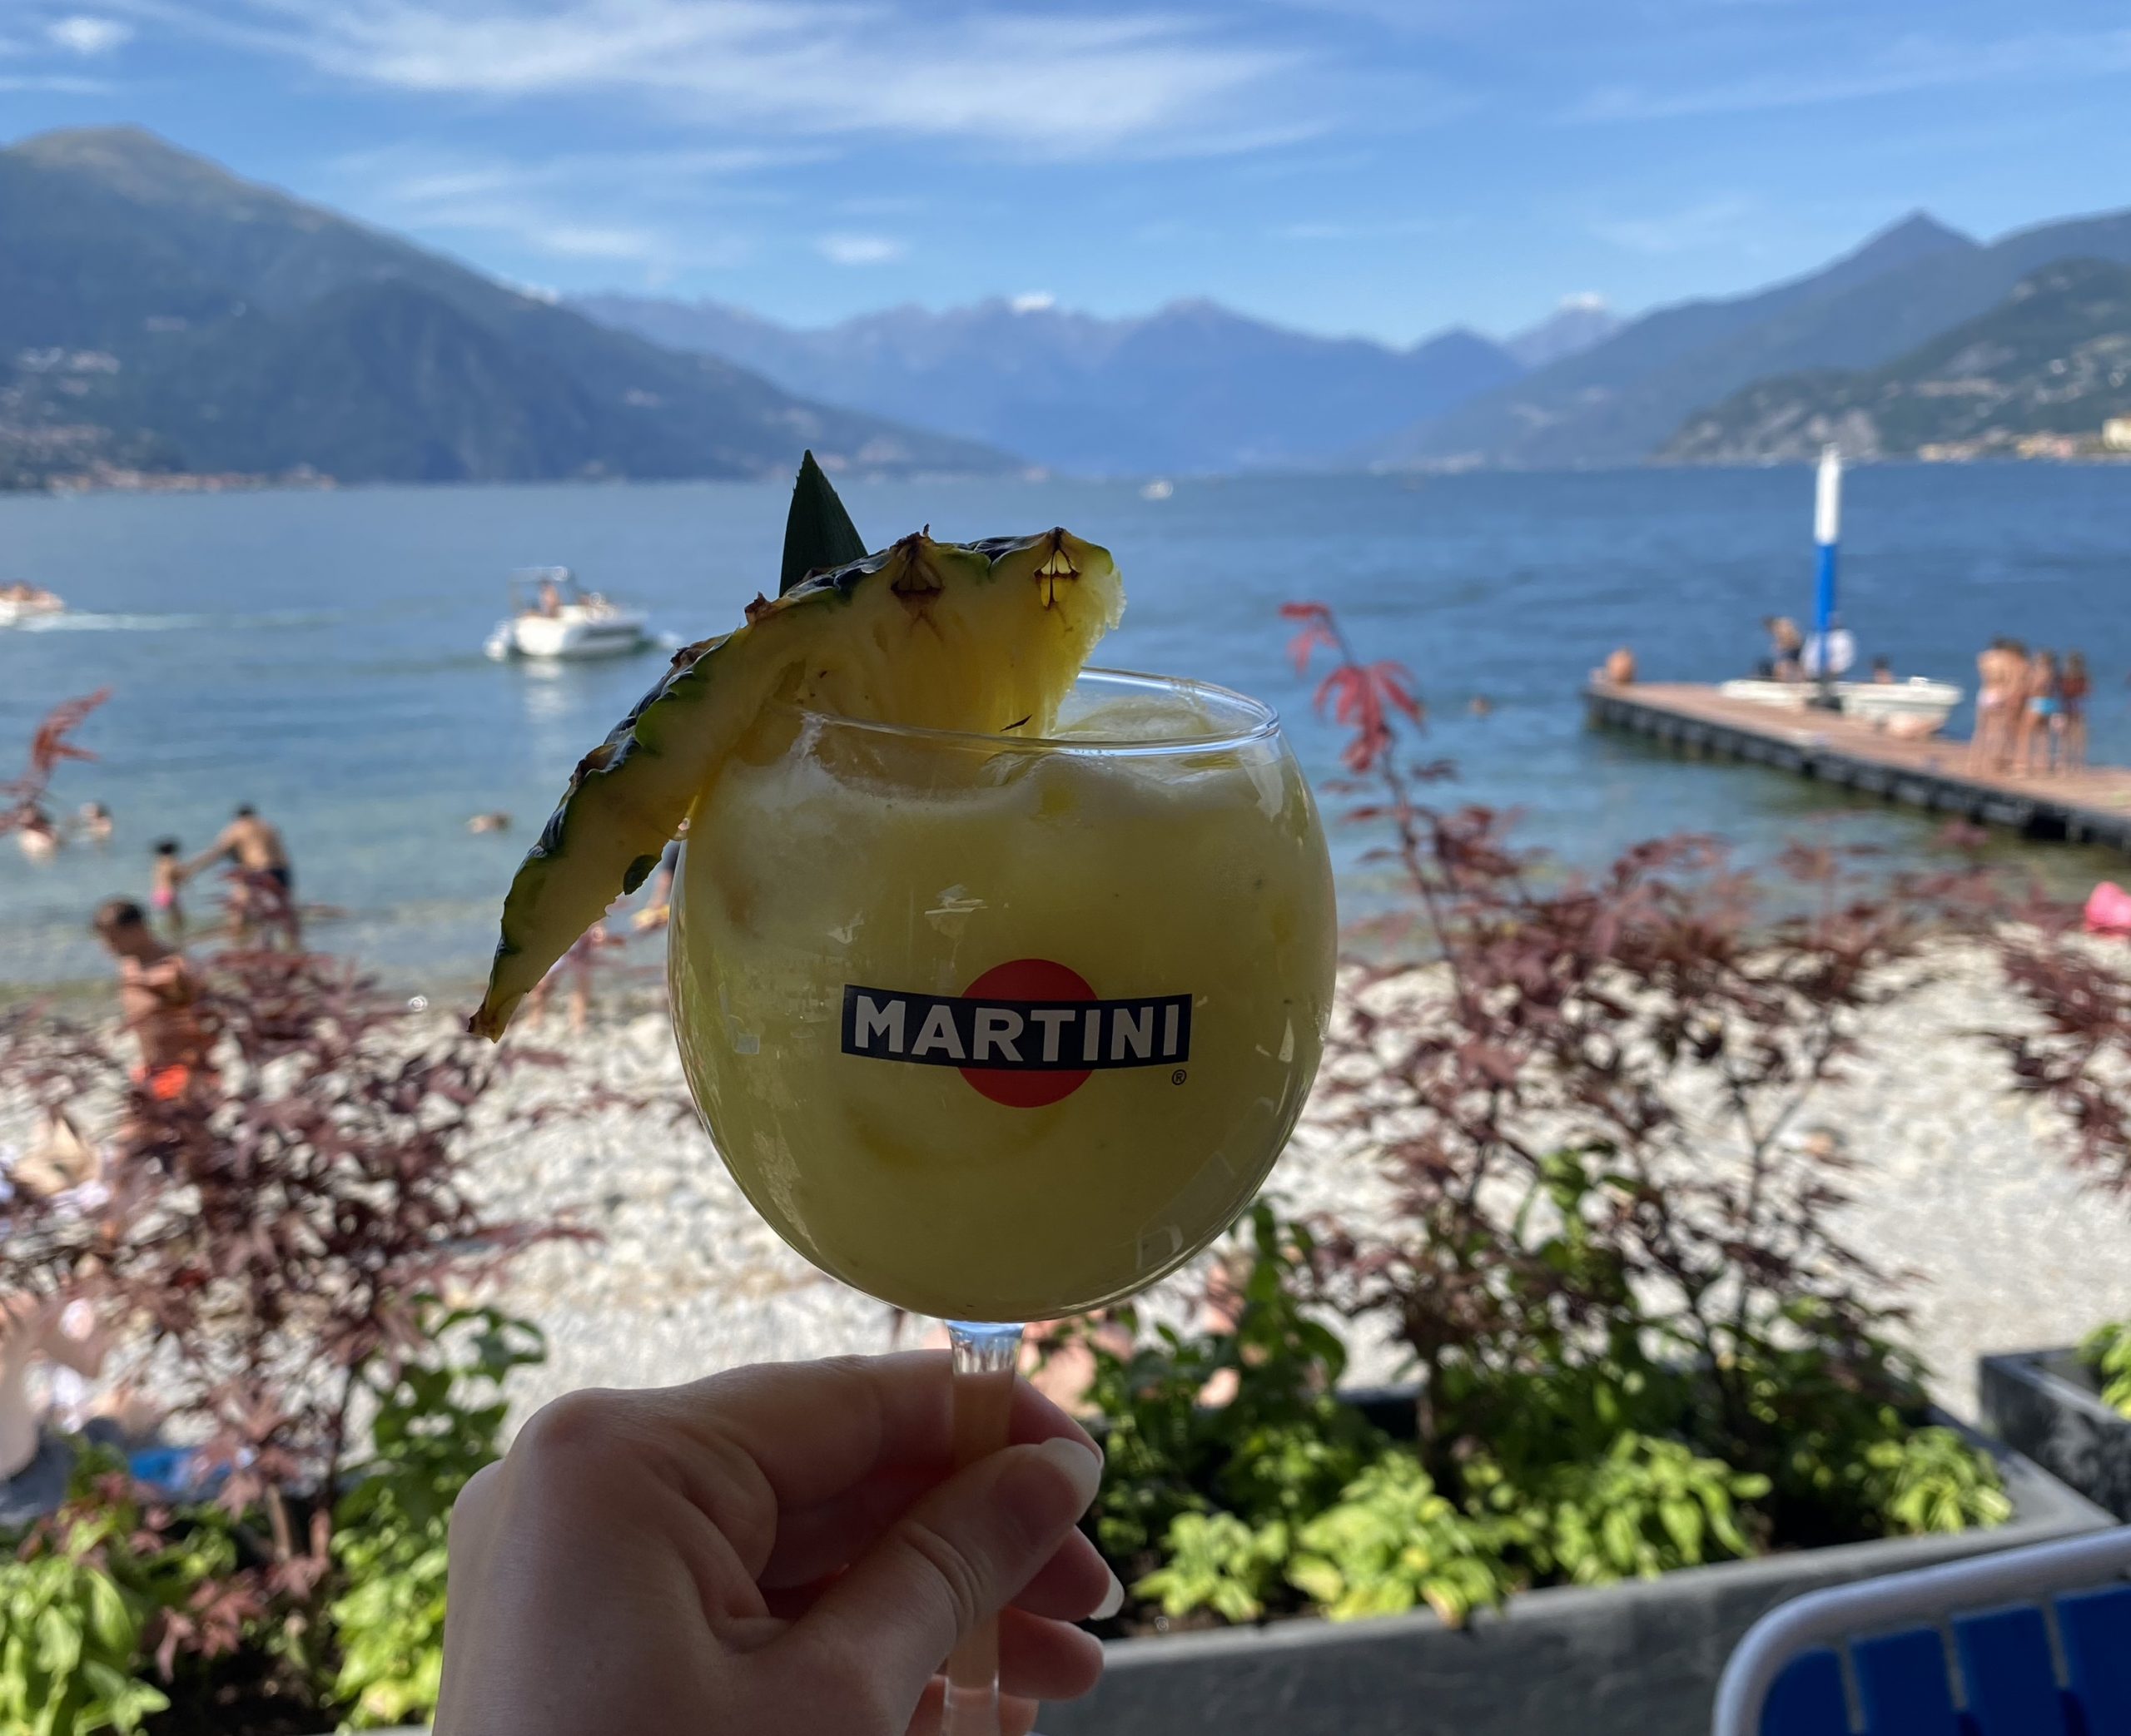 A hand holding up a yellow drink in a goblet glass with a pineapple chunk in it in front of a pebbled beach with blue water and mountains in the backdrop